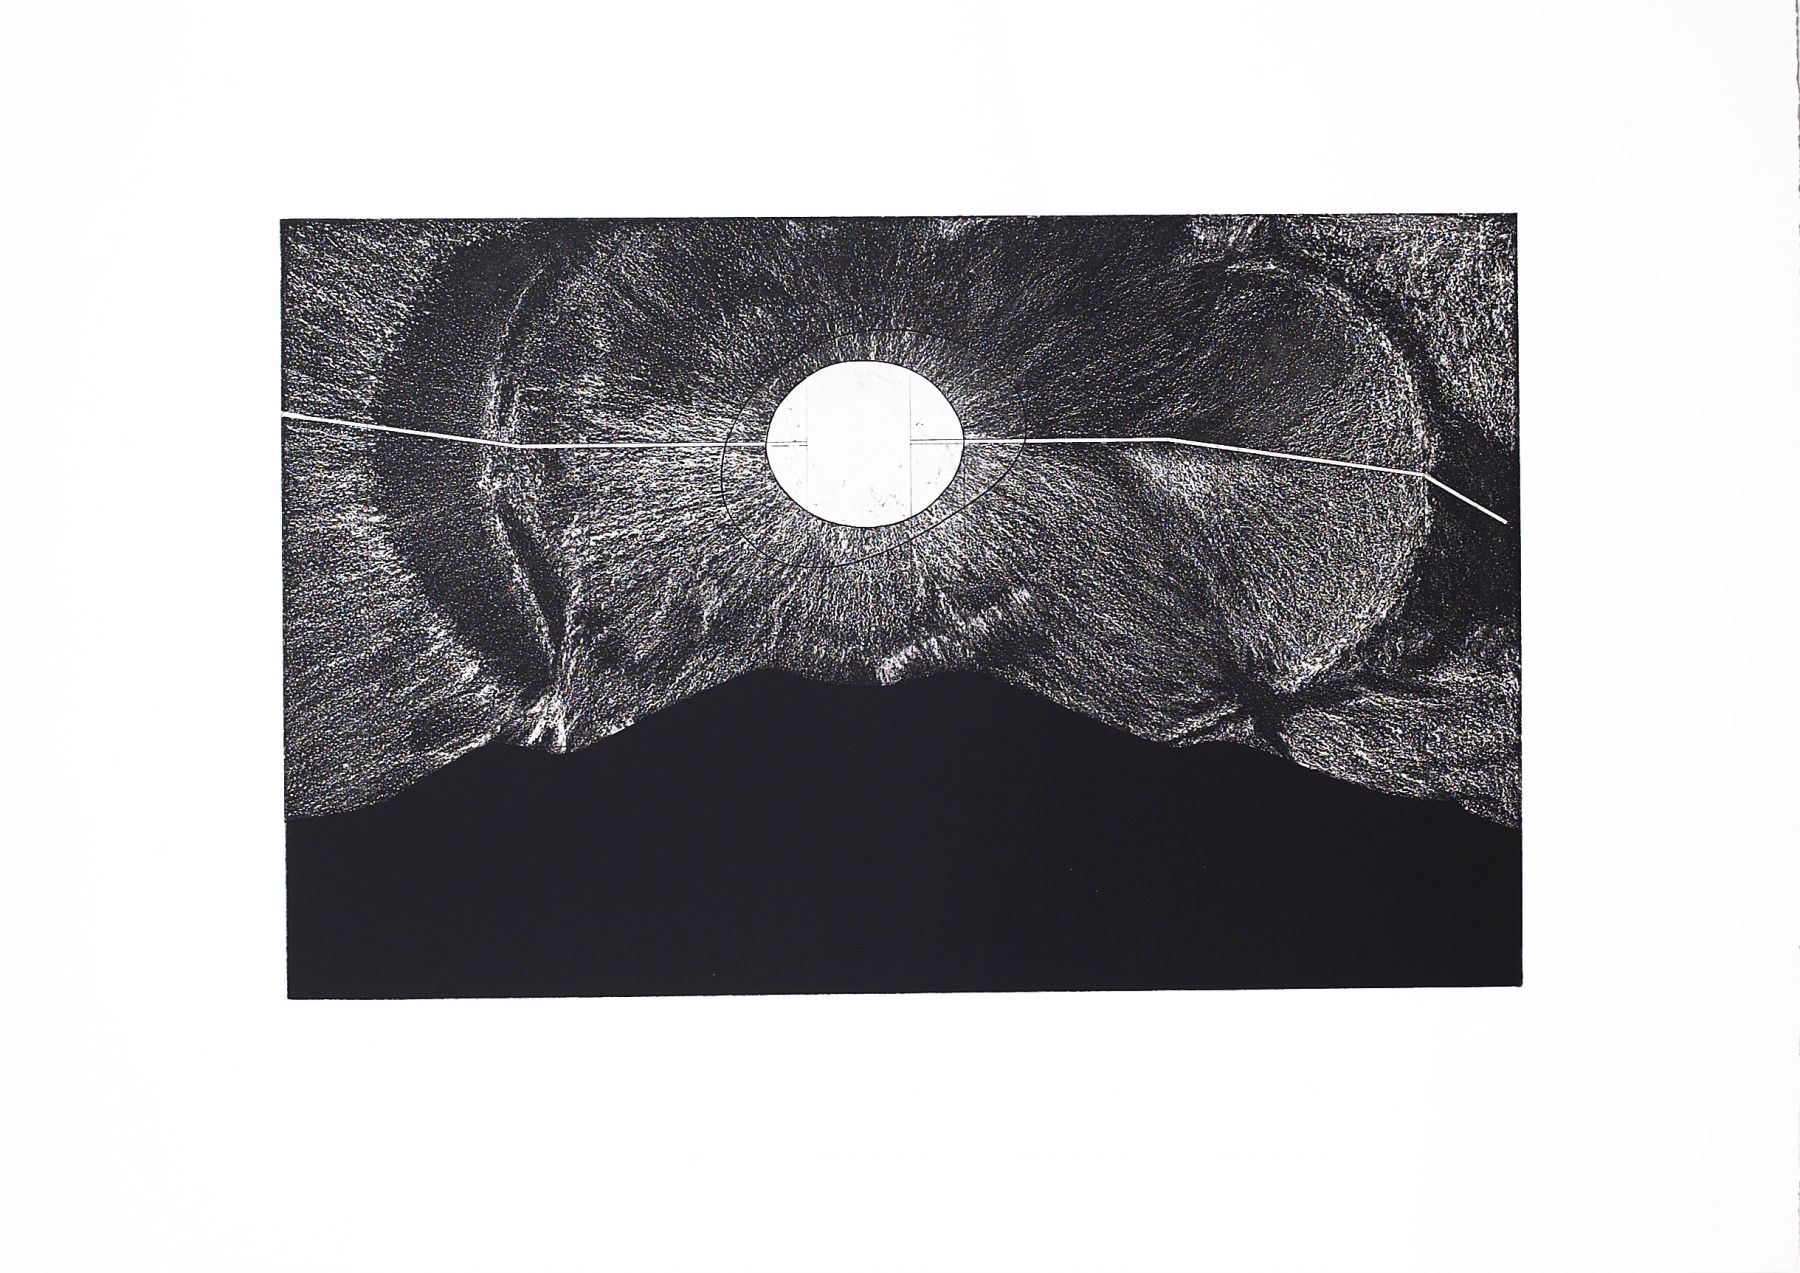 James Turrell
Fumarole from the series&nbsp;Mapping Spaces,&nbsp;1987
Etching, aquatint, photo-etching, drypoint, and soft-ground
22 x 30 inches (56 x 78 cm)
Edition of 35 + proofs

Inquire